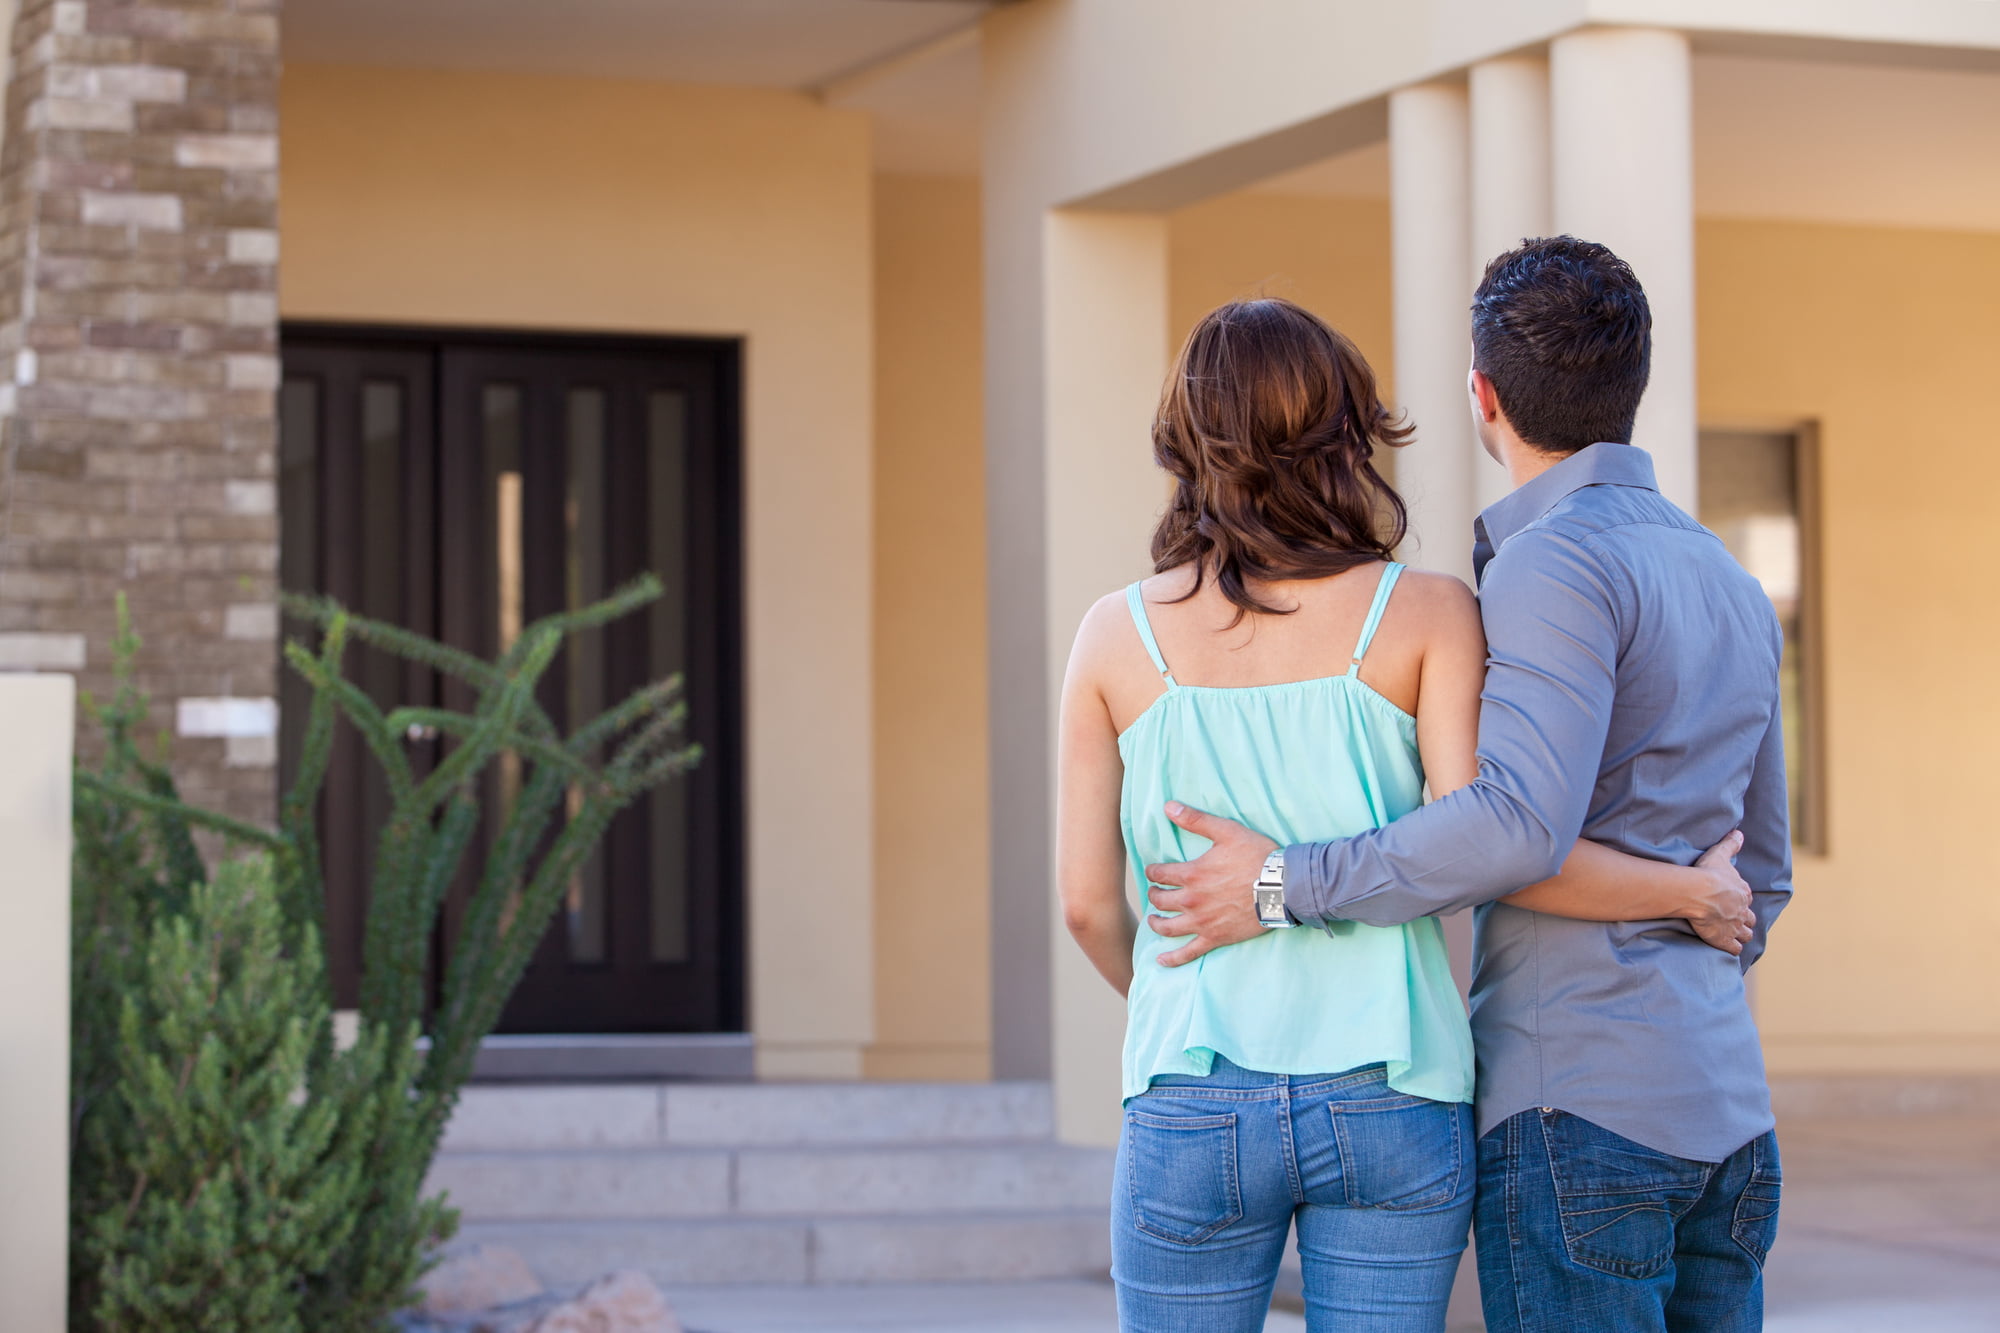 Purchasing your first home may seem challenging, but there are ways to simplify the process. Here are some great tips for buying a house.